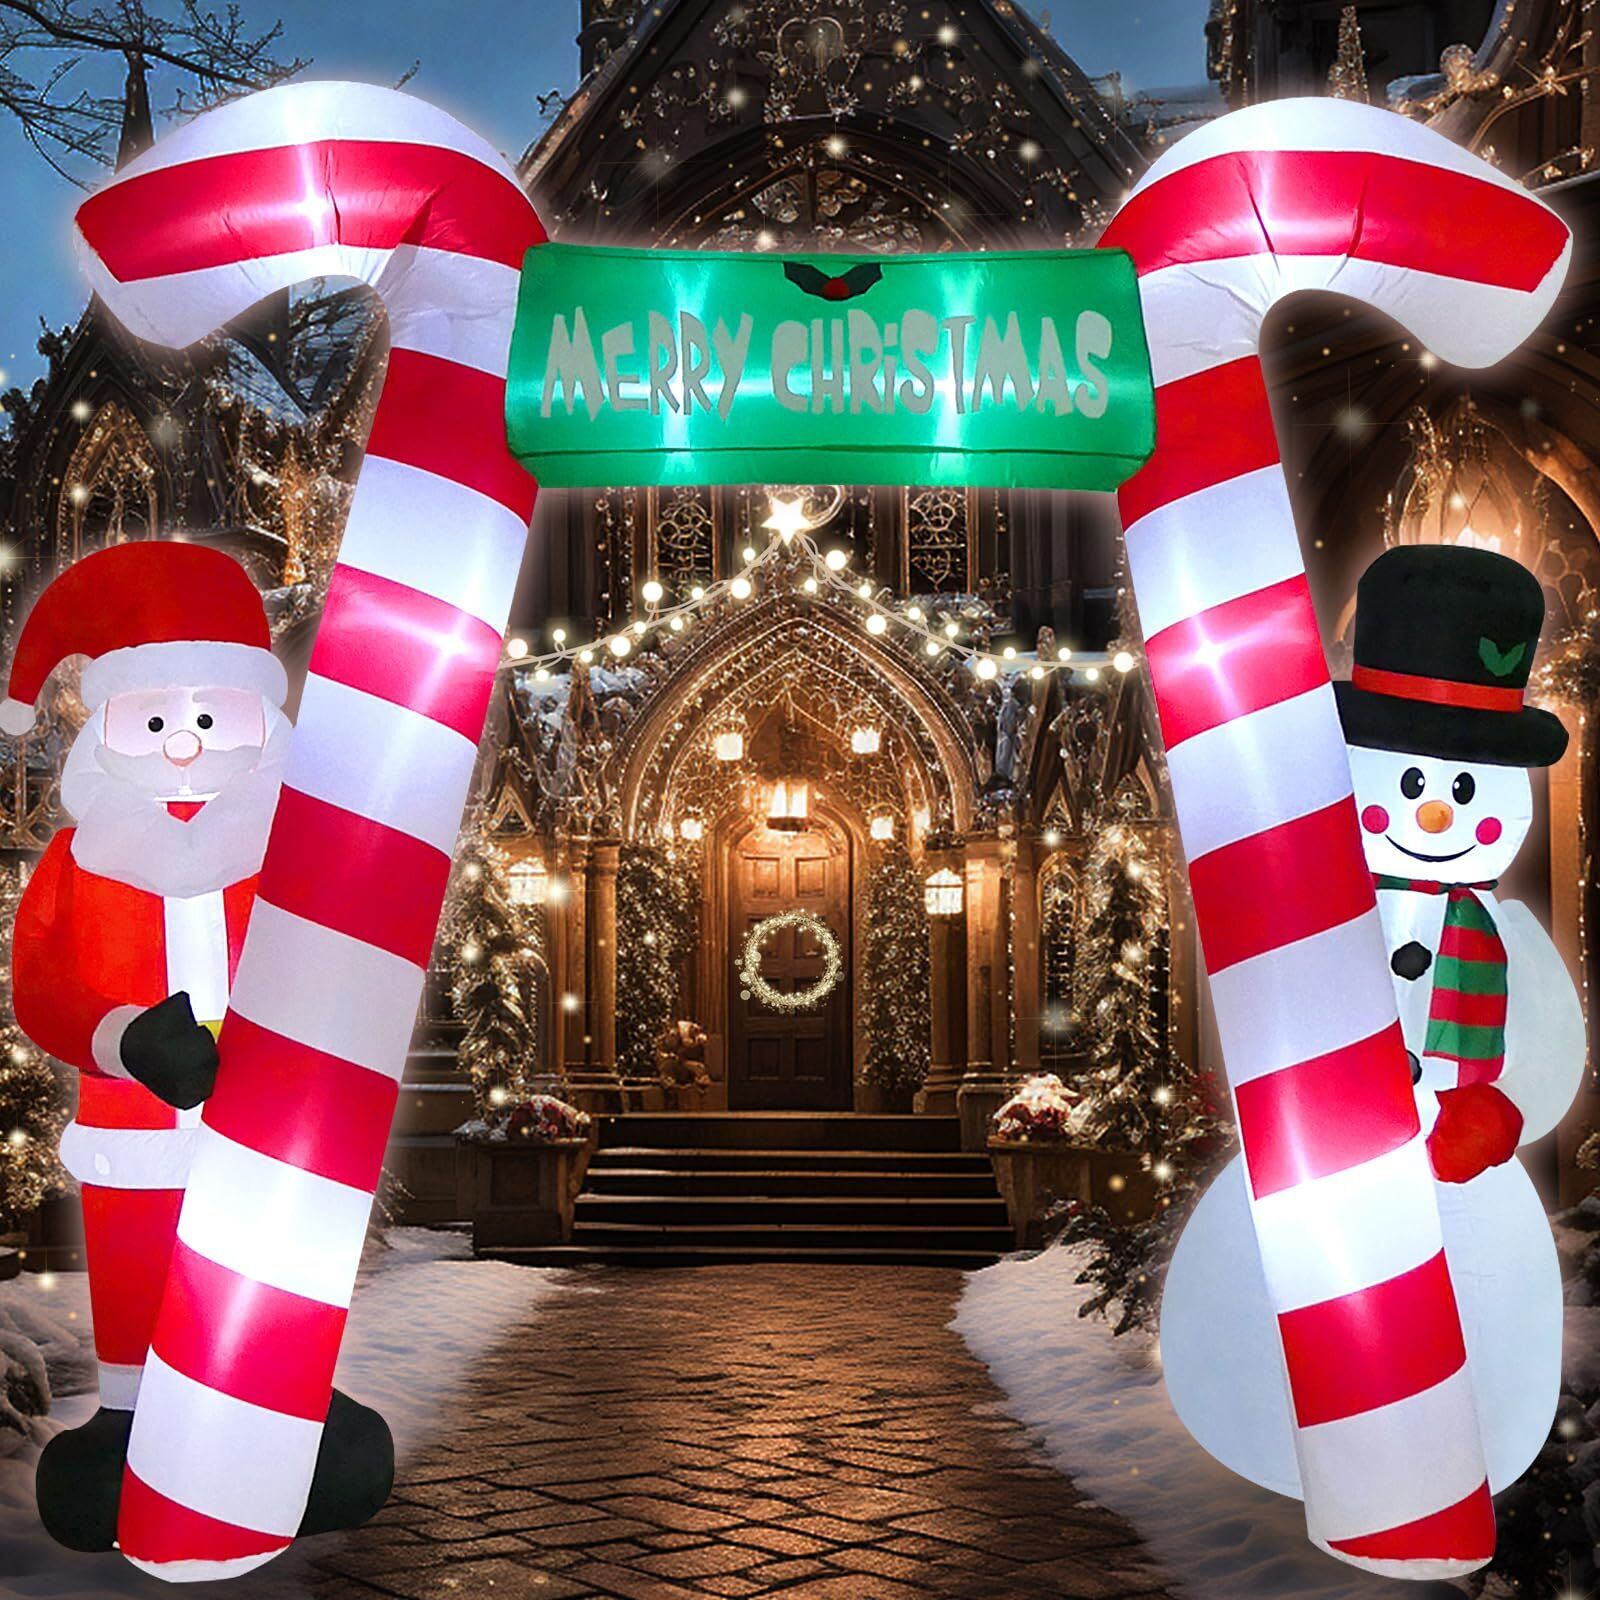 9 FT Christmas Inflatable Candy Cane Archway with Santa and Snowman, Blow